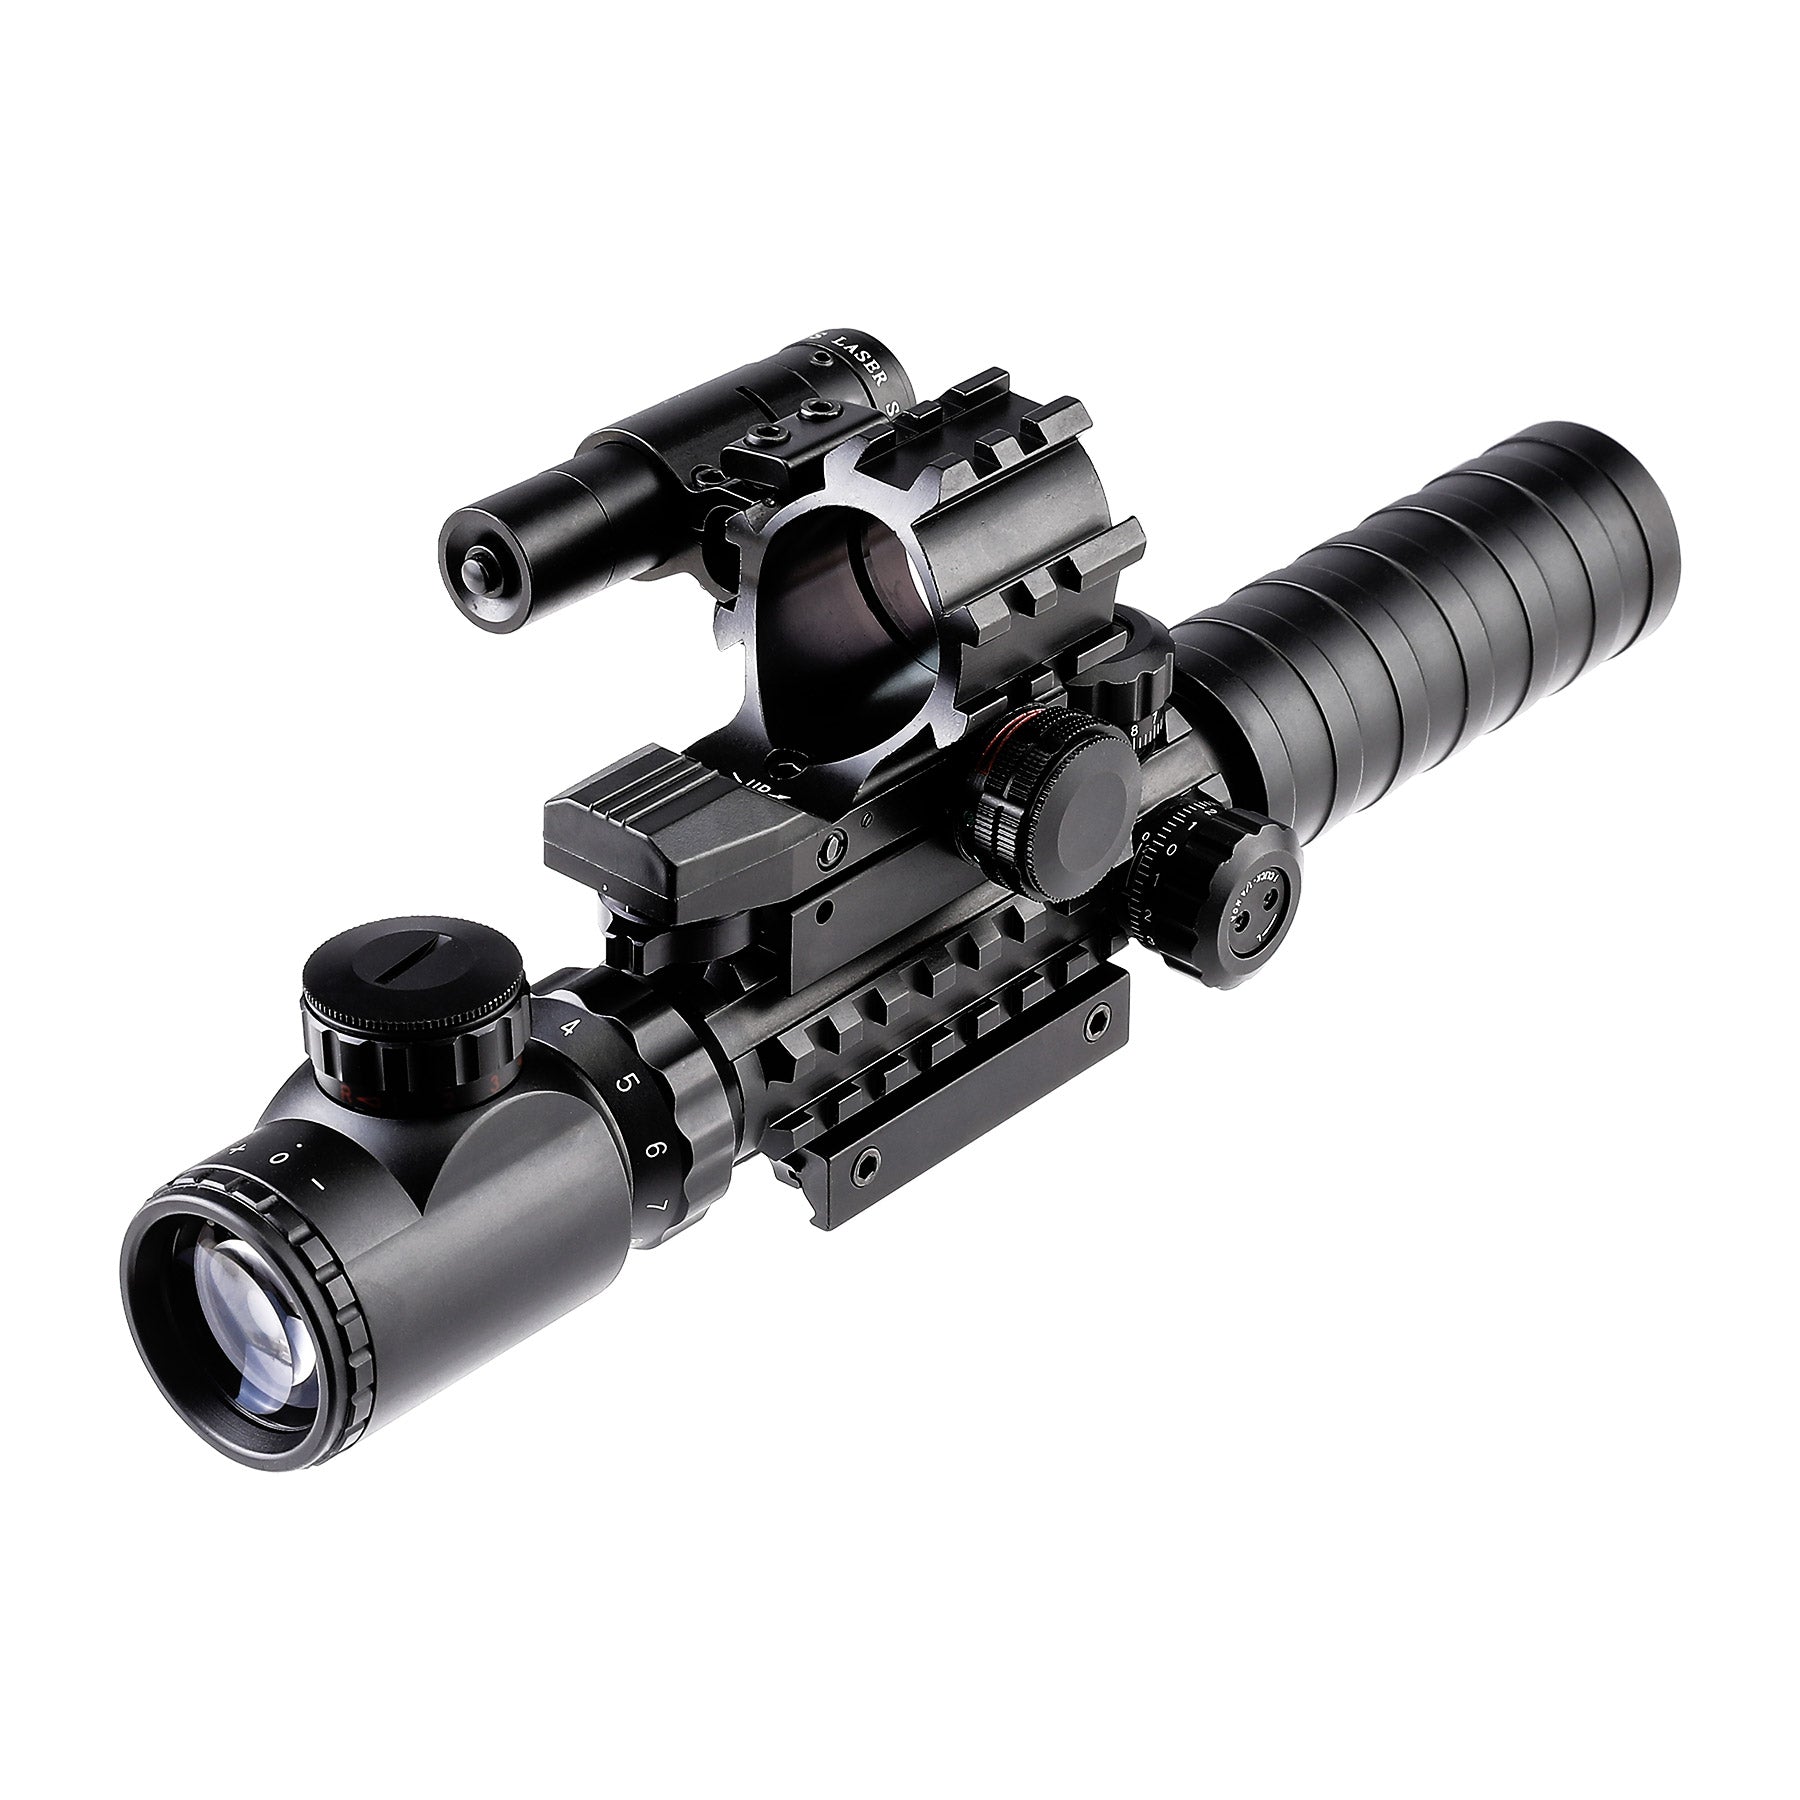 3-in-1 Rifle Scope Combo, 3-9*32 Rangefinder Scope, Green Laser, Red&Green Dot Sight, 14 Slots Riser